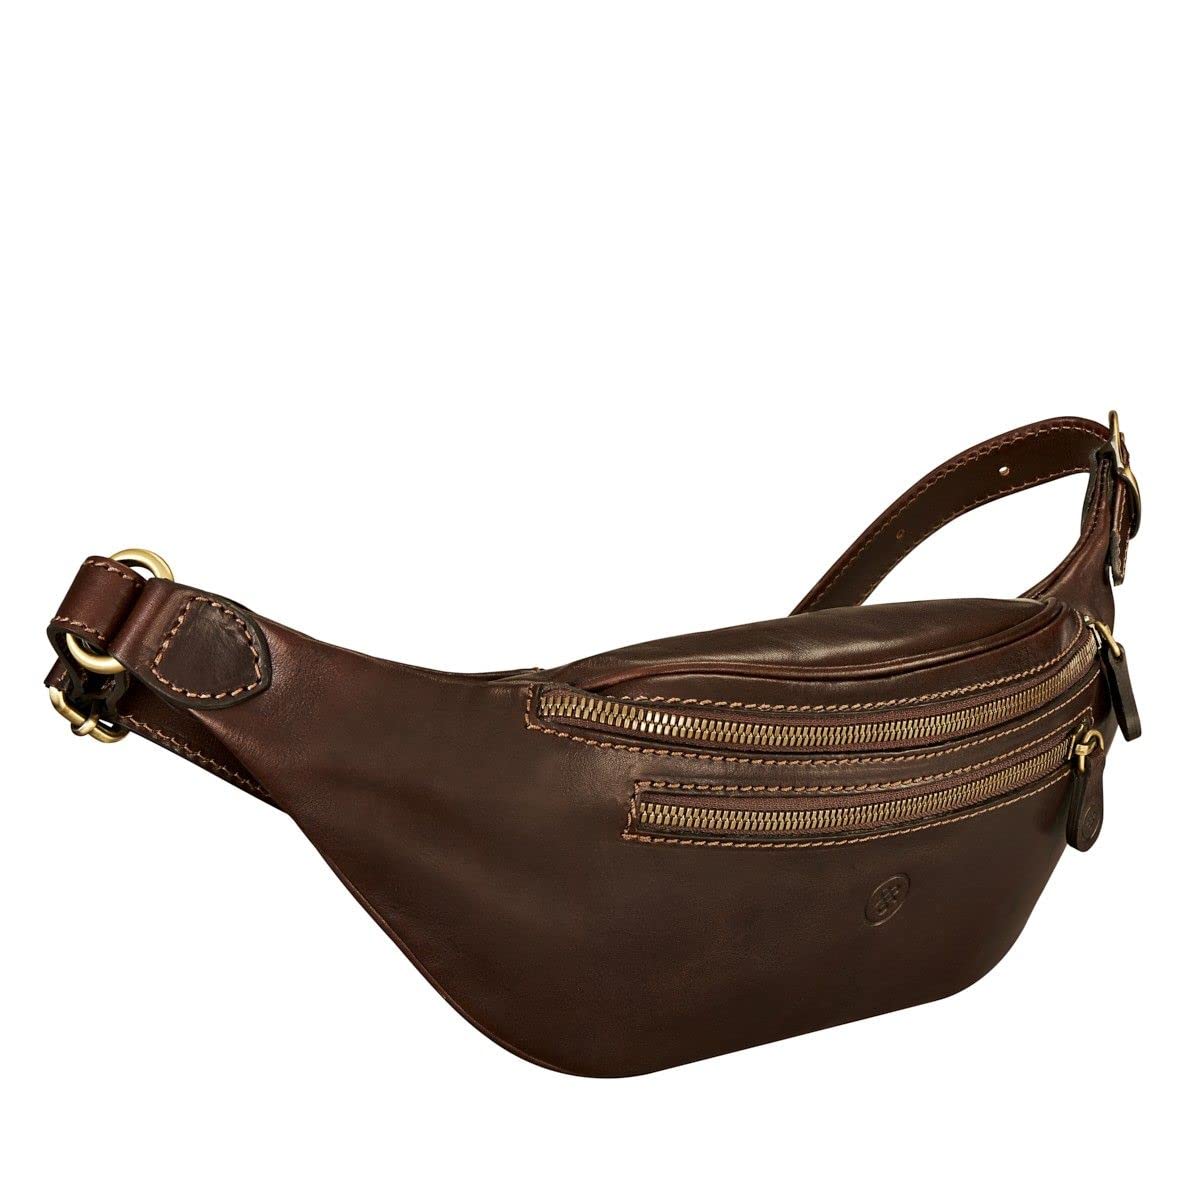 Maxwell Scott | Luxury Leather Fanny Pack | The Centolla | Handmade In Italy | Dark Chocolate Brown